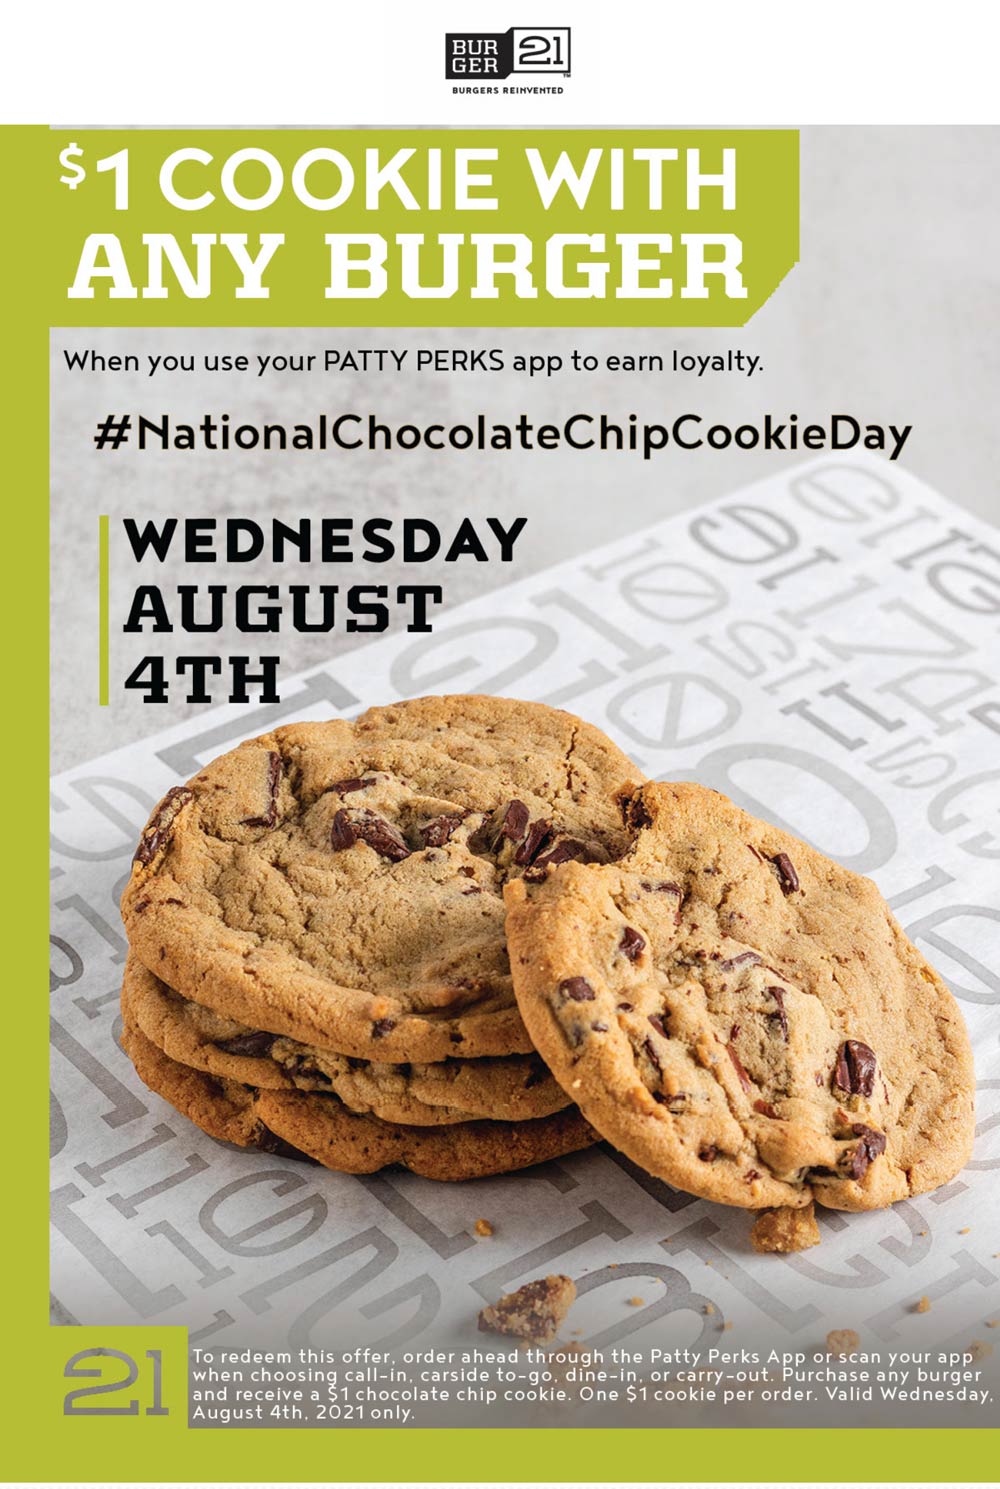 Burger 21 restaurants Coupon  $1 cookie with your burger today at Burger 21 restaurants #burger21 